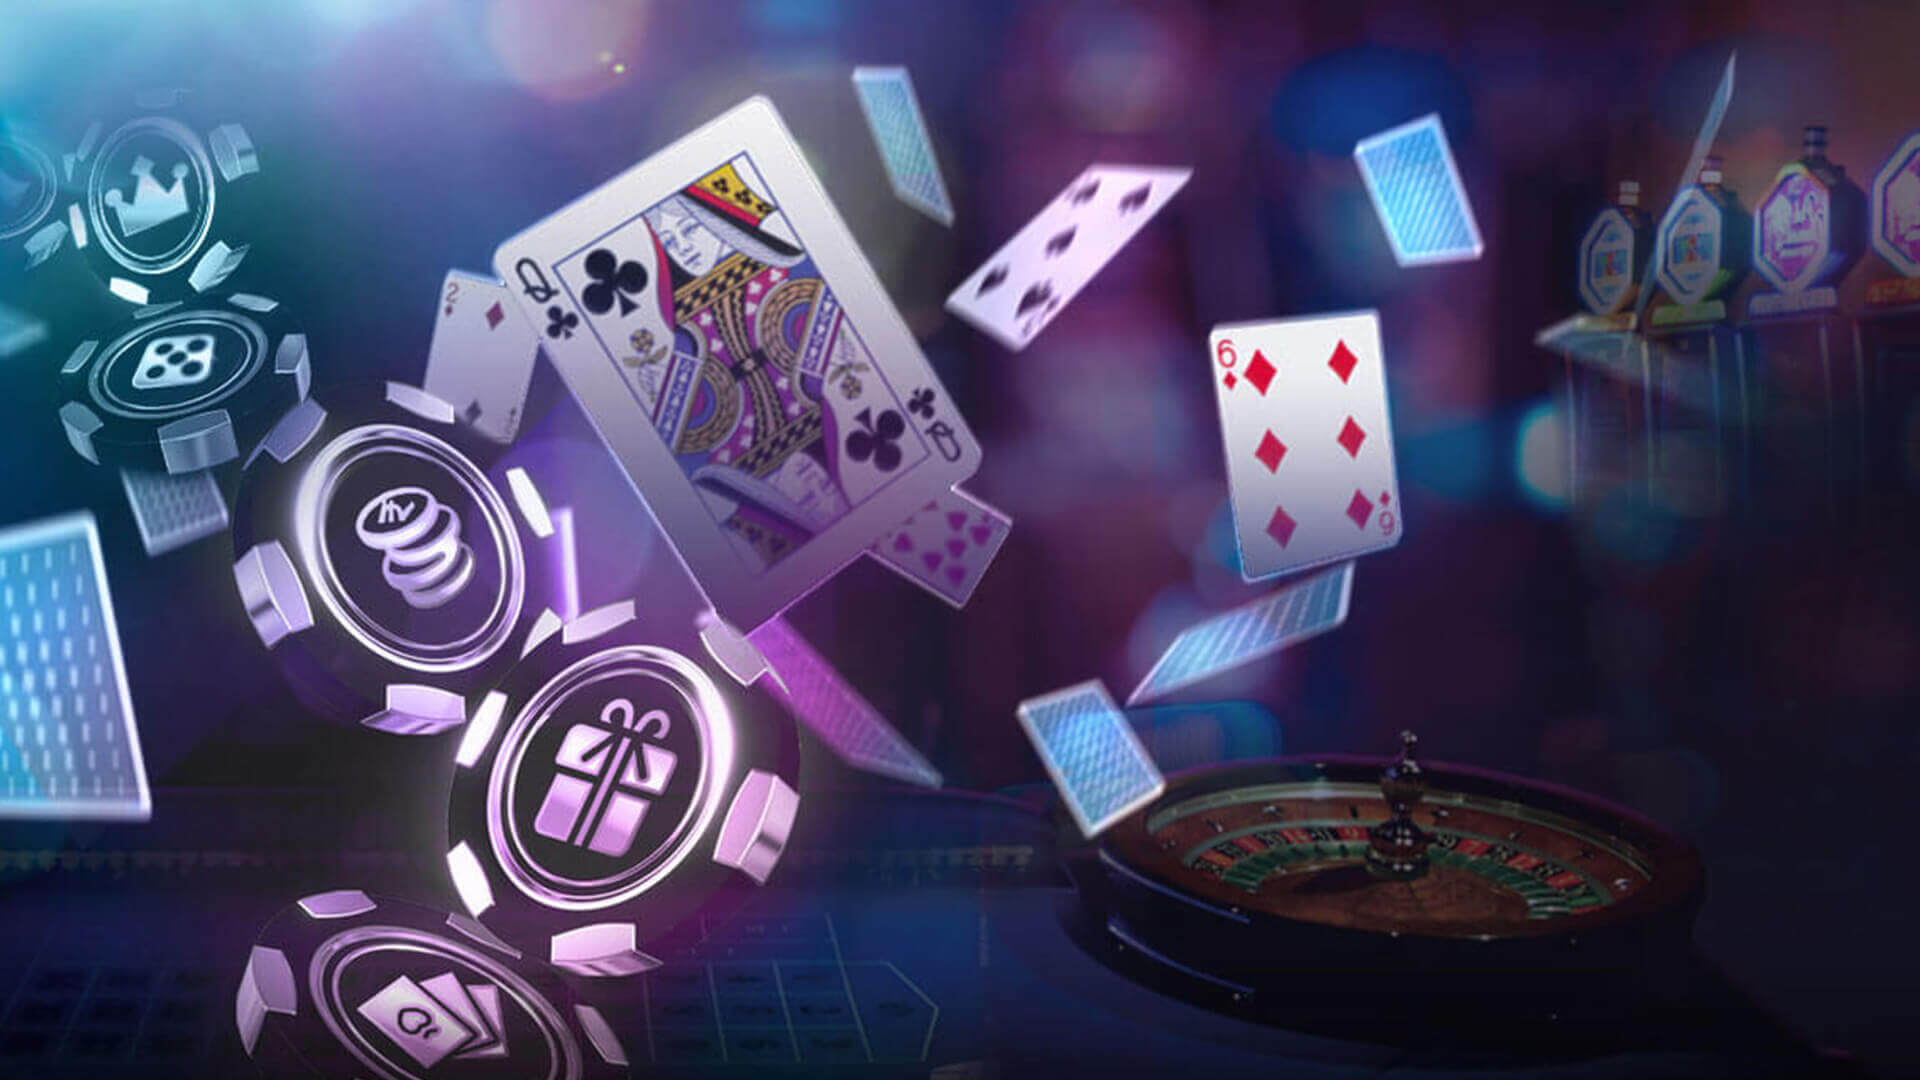 How to find trusted reviews for online casinos